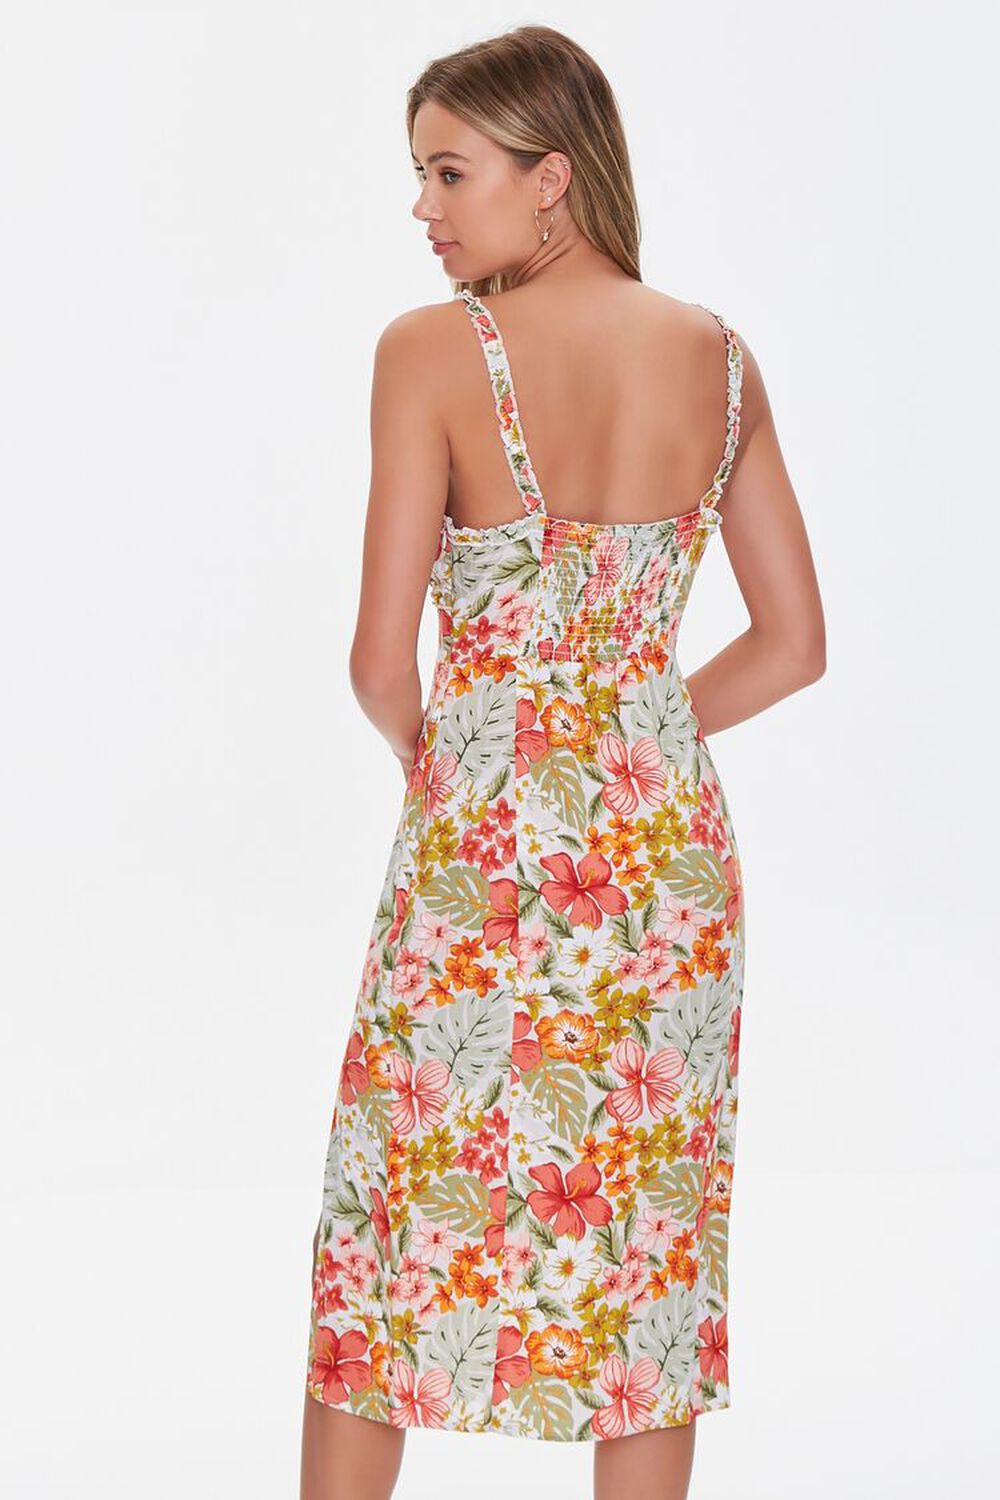 TAUPE/MULTI Tropical Floral Print Dress, image 3